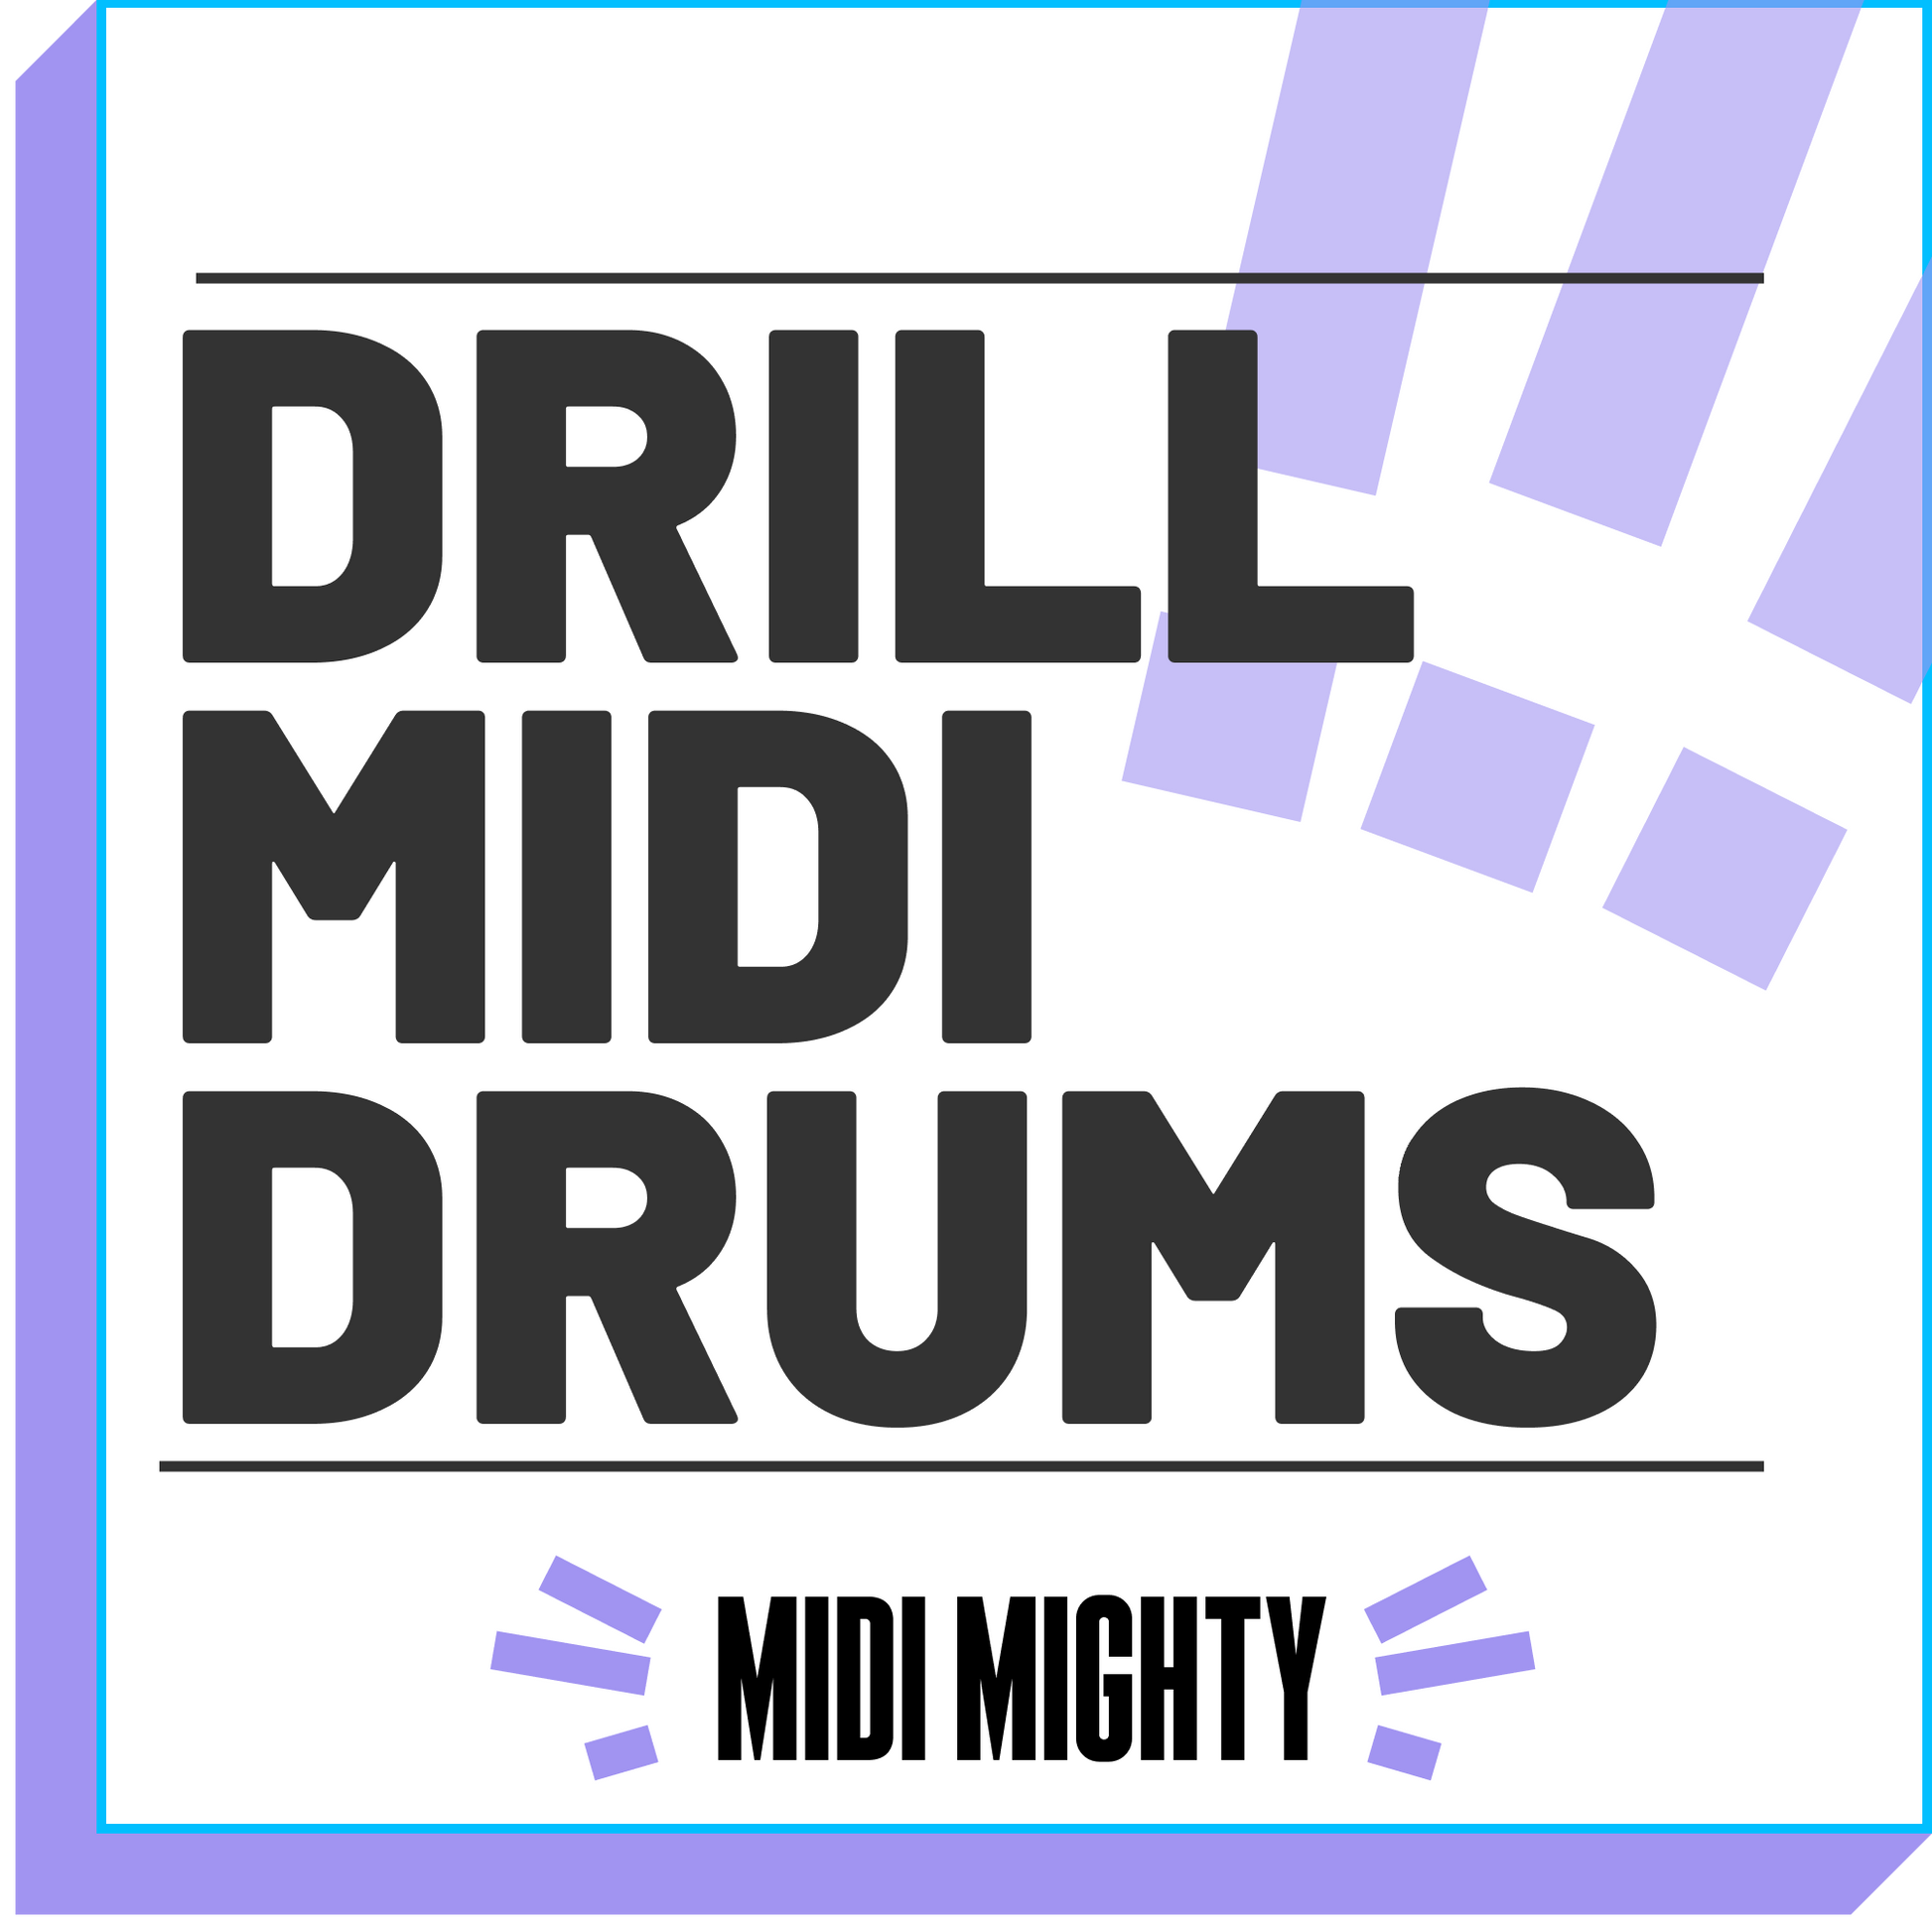 Drill HipHop Drum Guide - MIDI MIGHTY